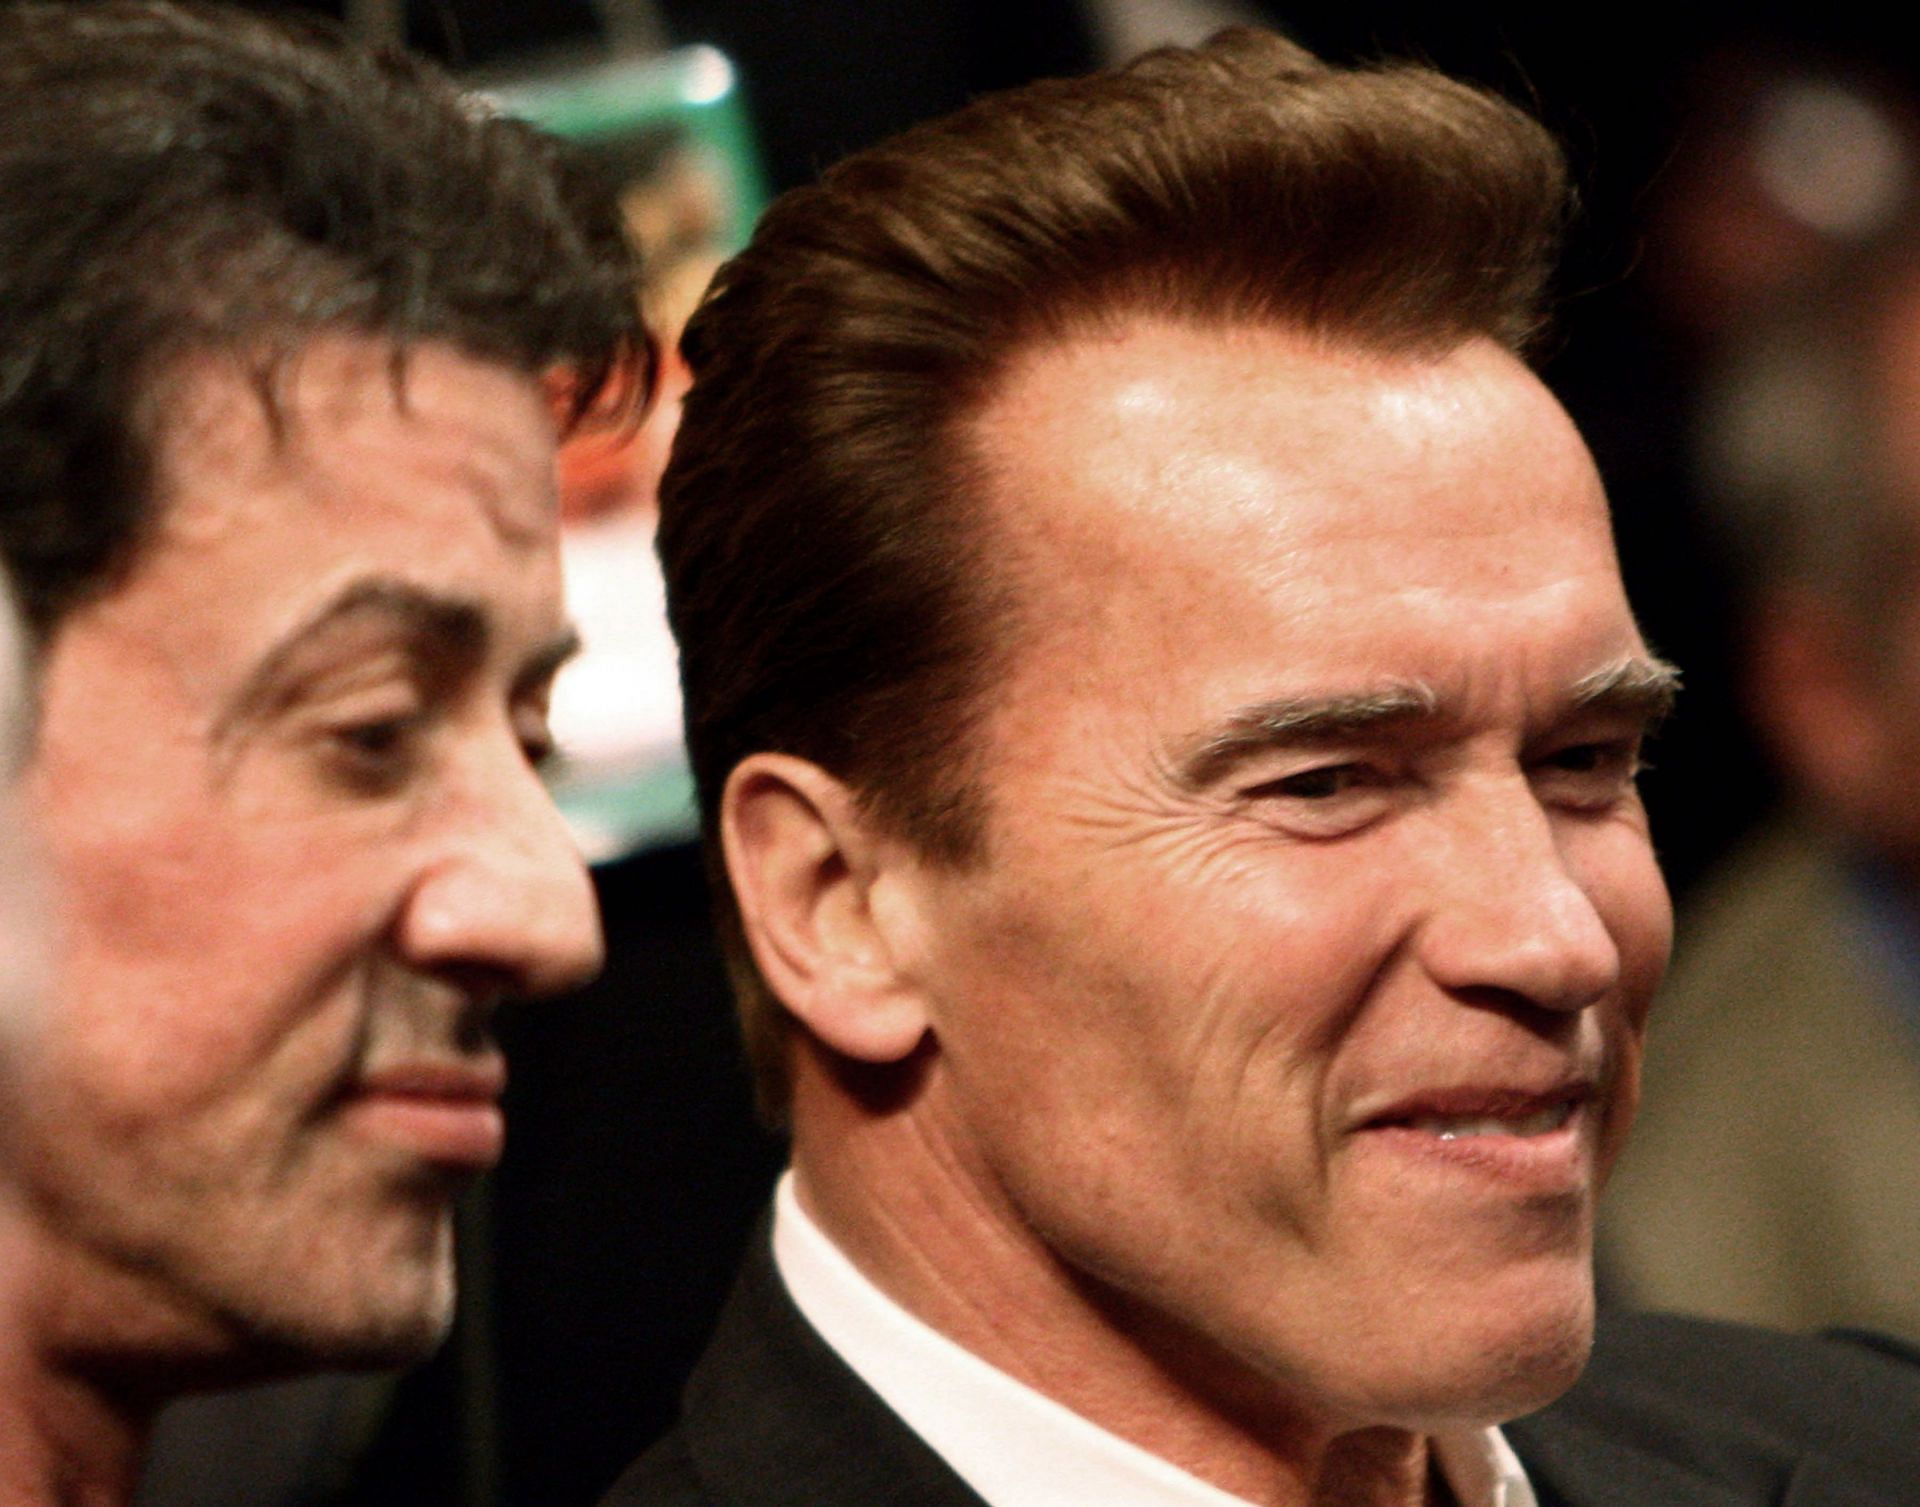 Arnold Schwarzenegger and Sylvester Stallone in 2009 (Image via Getty Images/Donald Miralle)